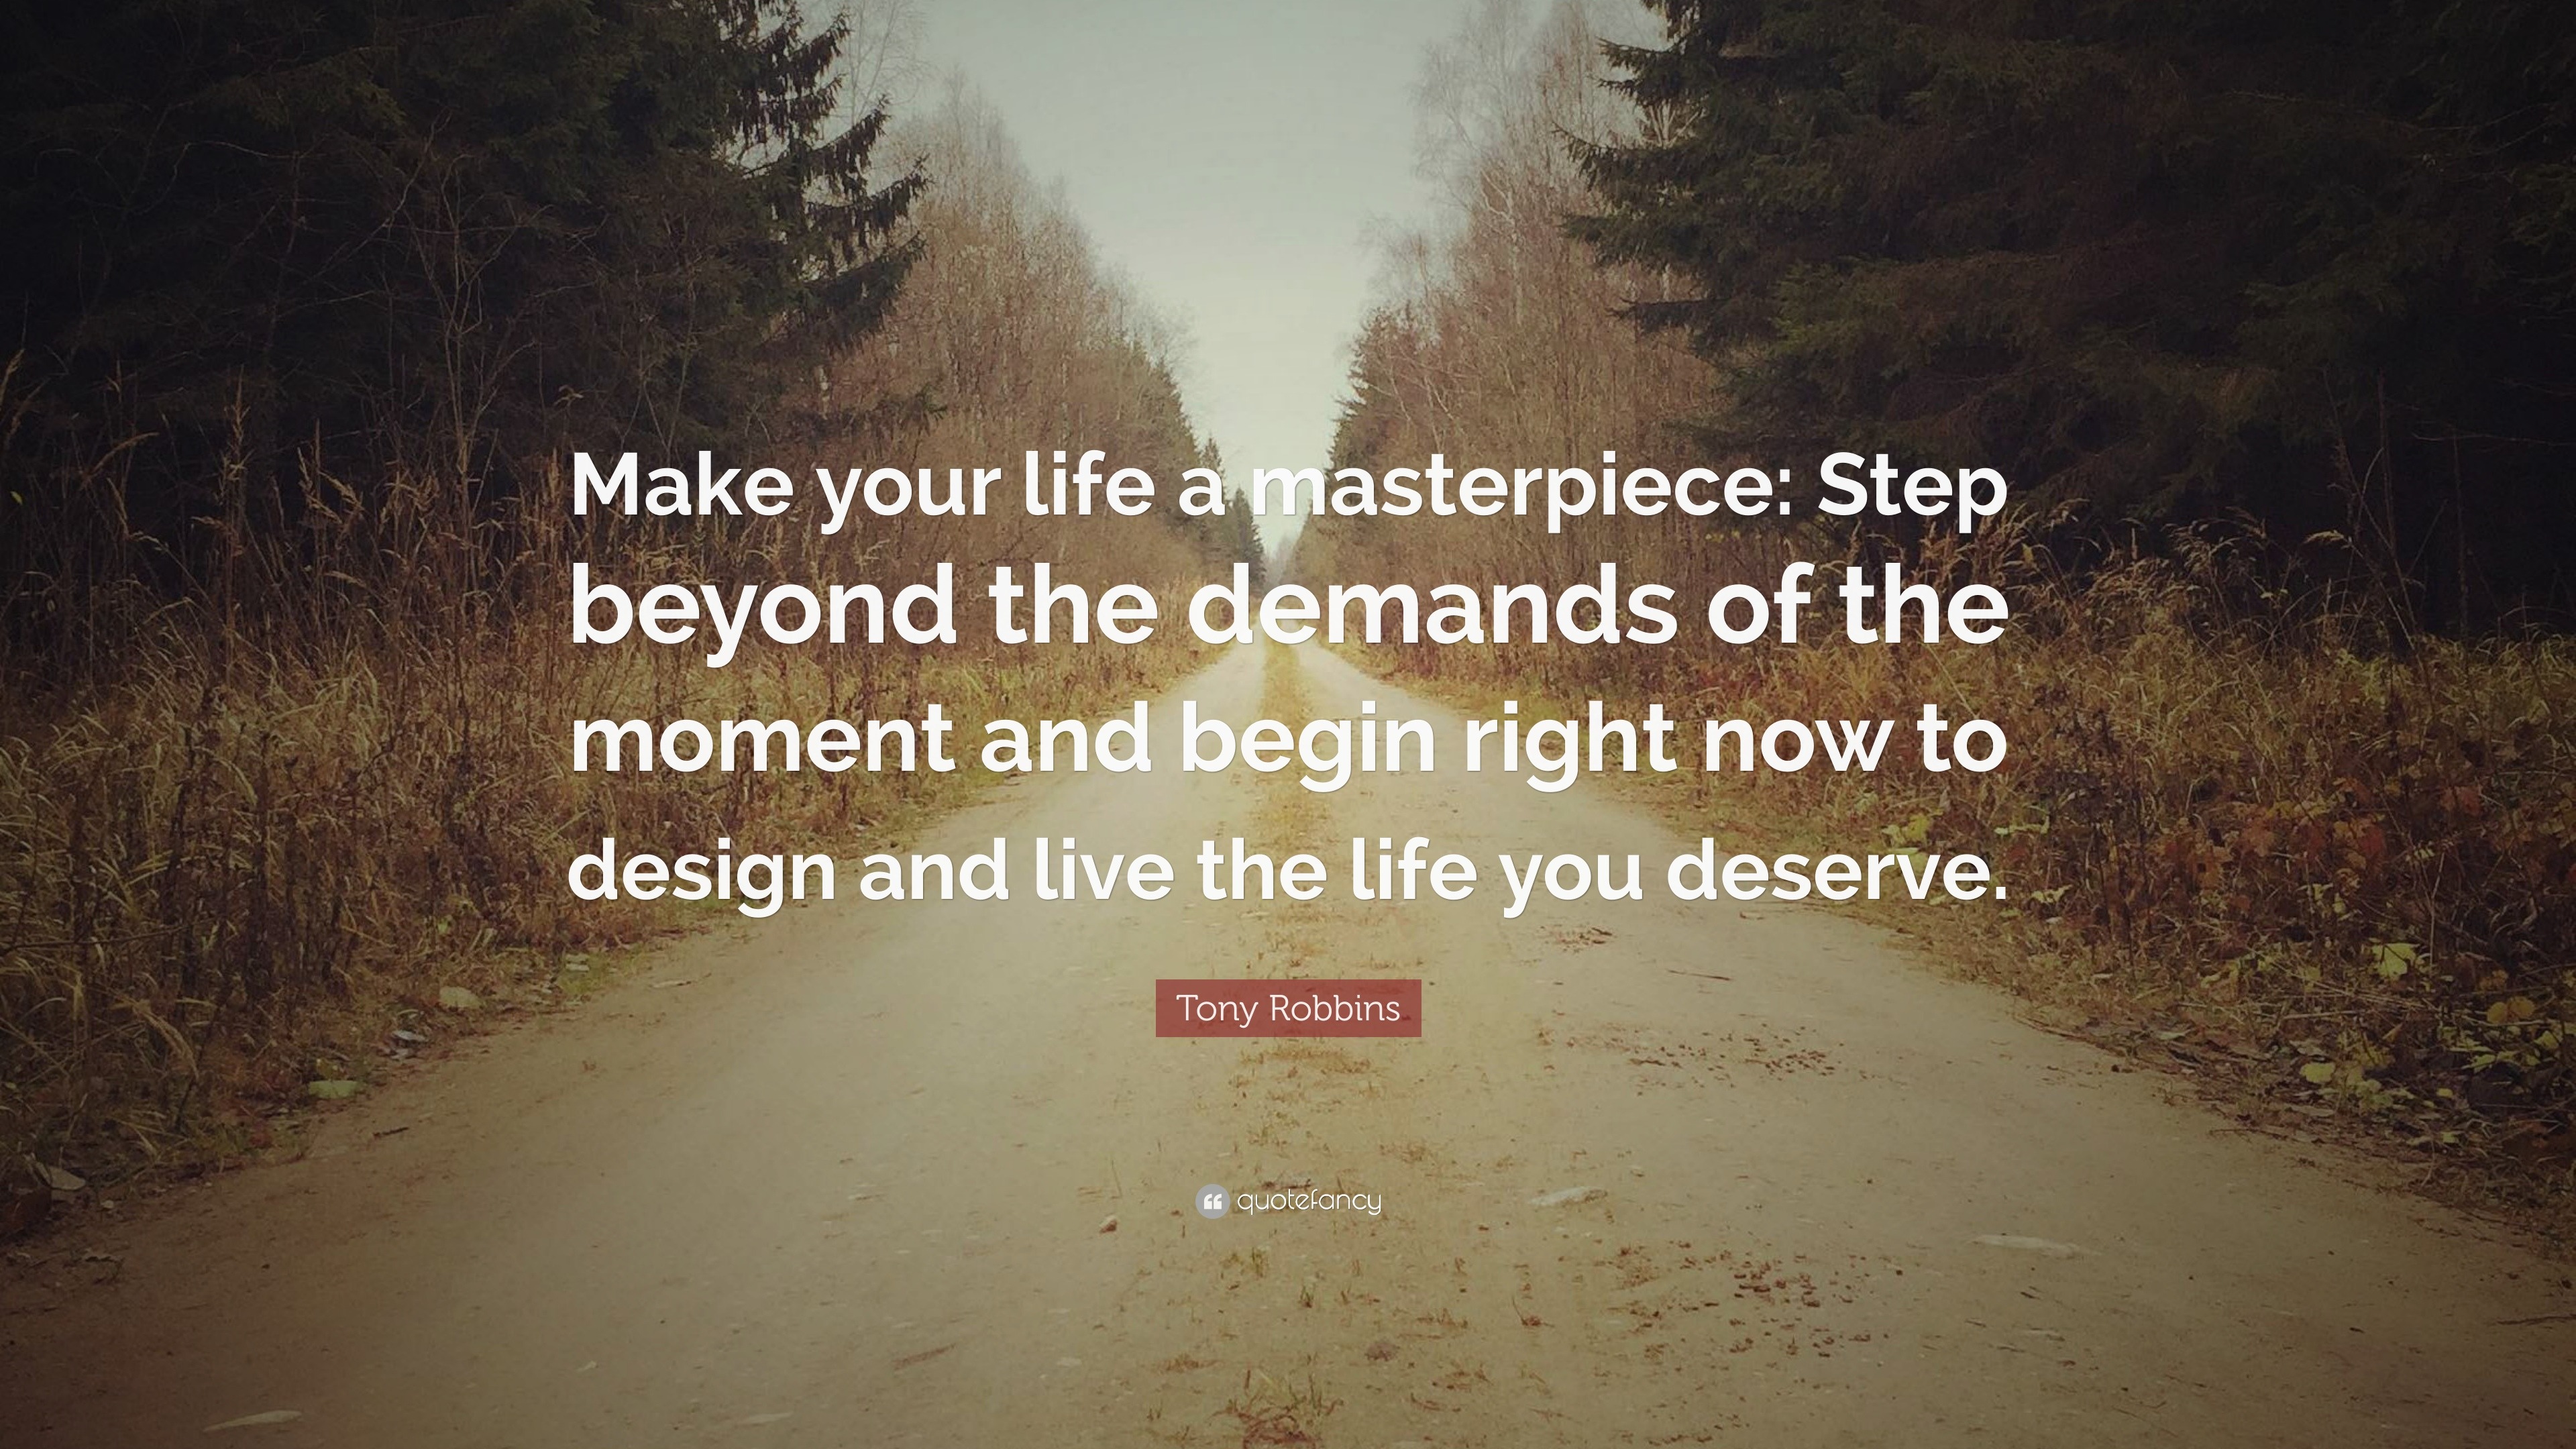 Tony Robbins Quote “Make your life a masterpiece Step beyond the demands of